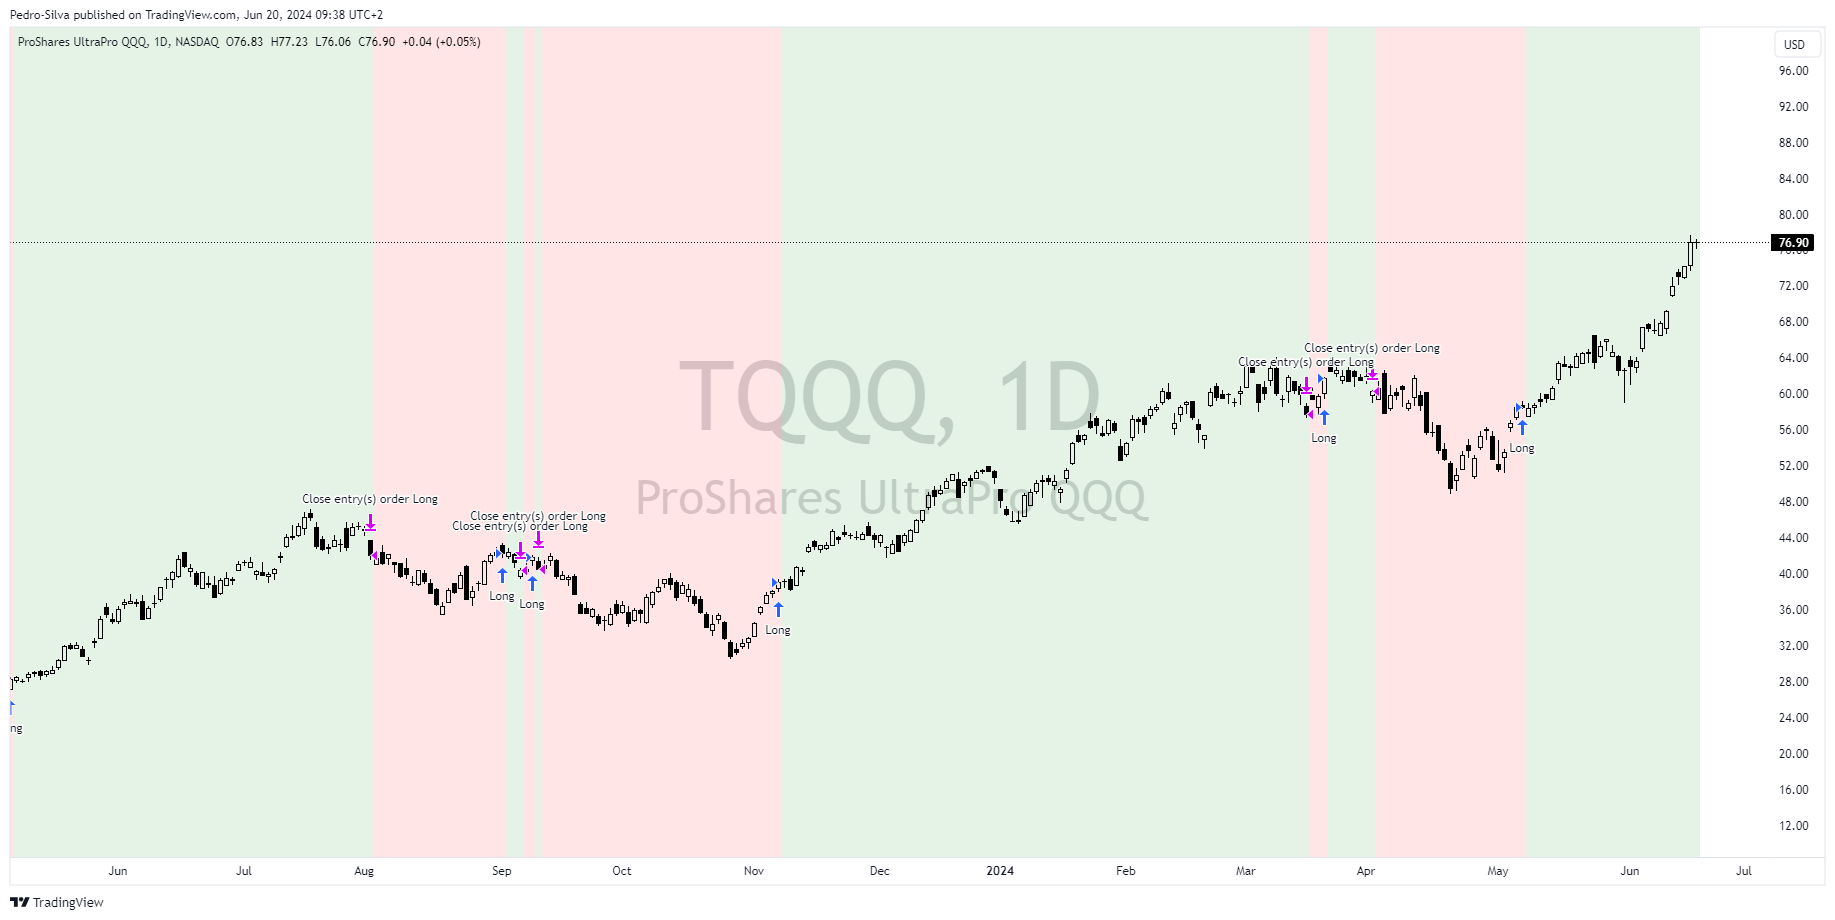 Chart of TQQQ showing Alpha Signals strategy on a green signal since May 8